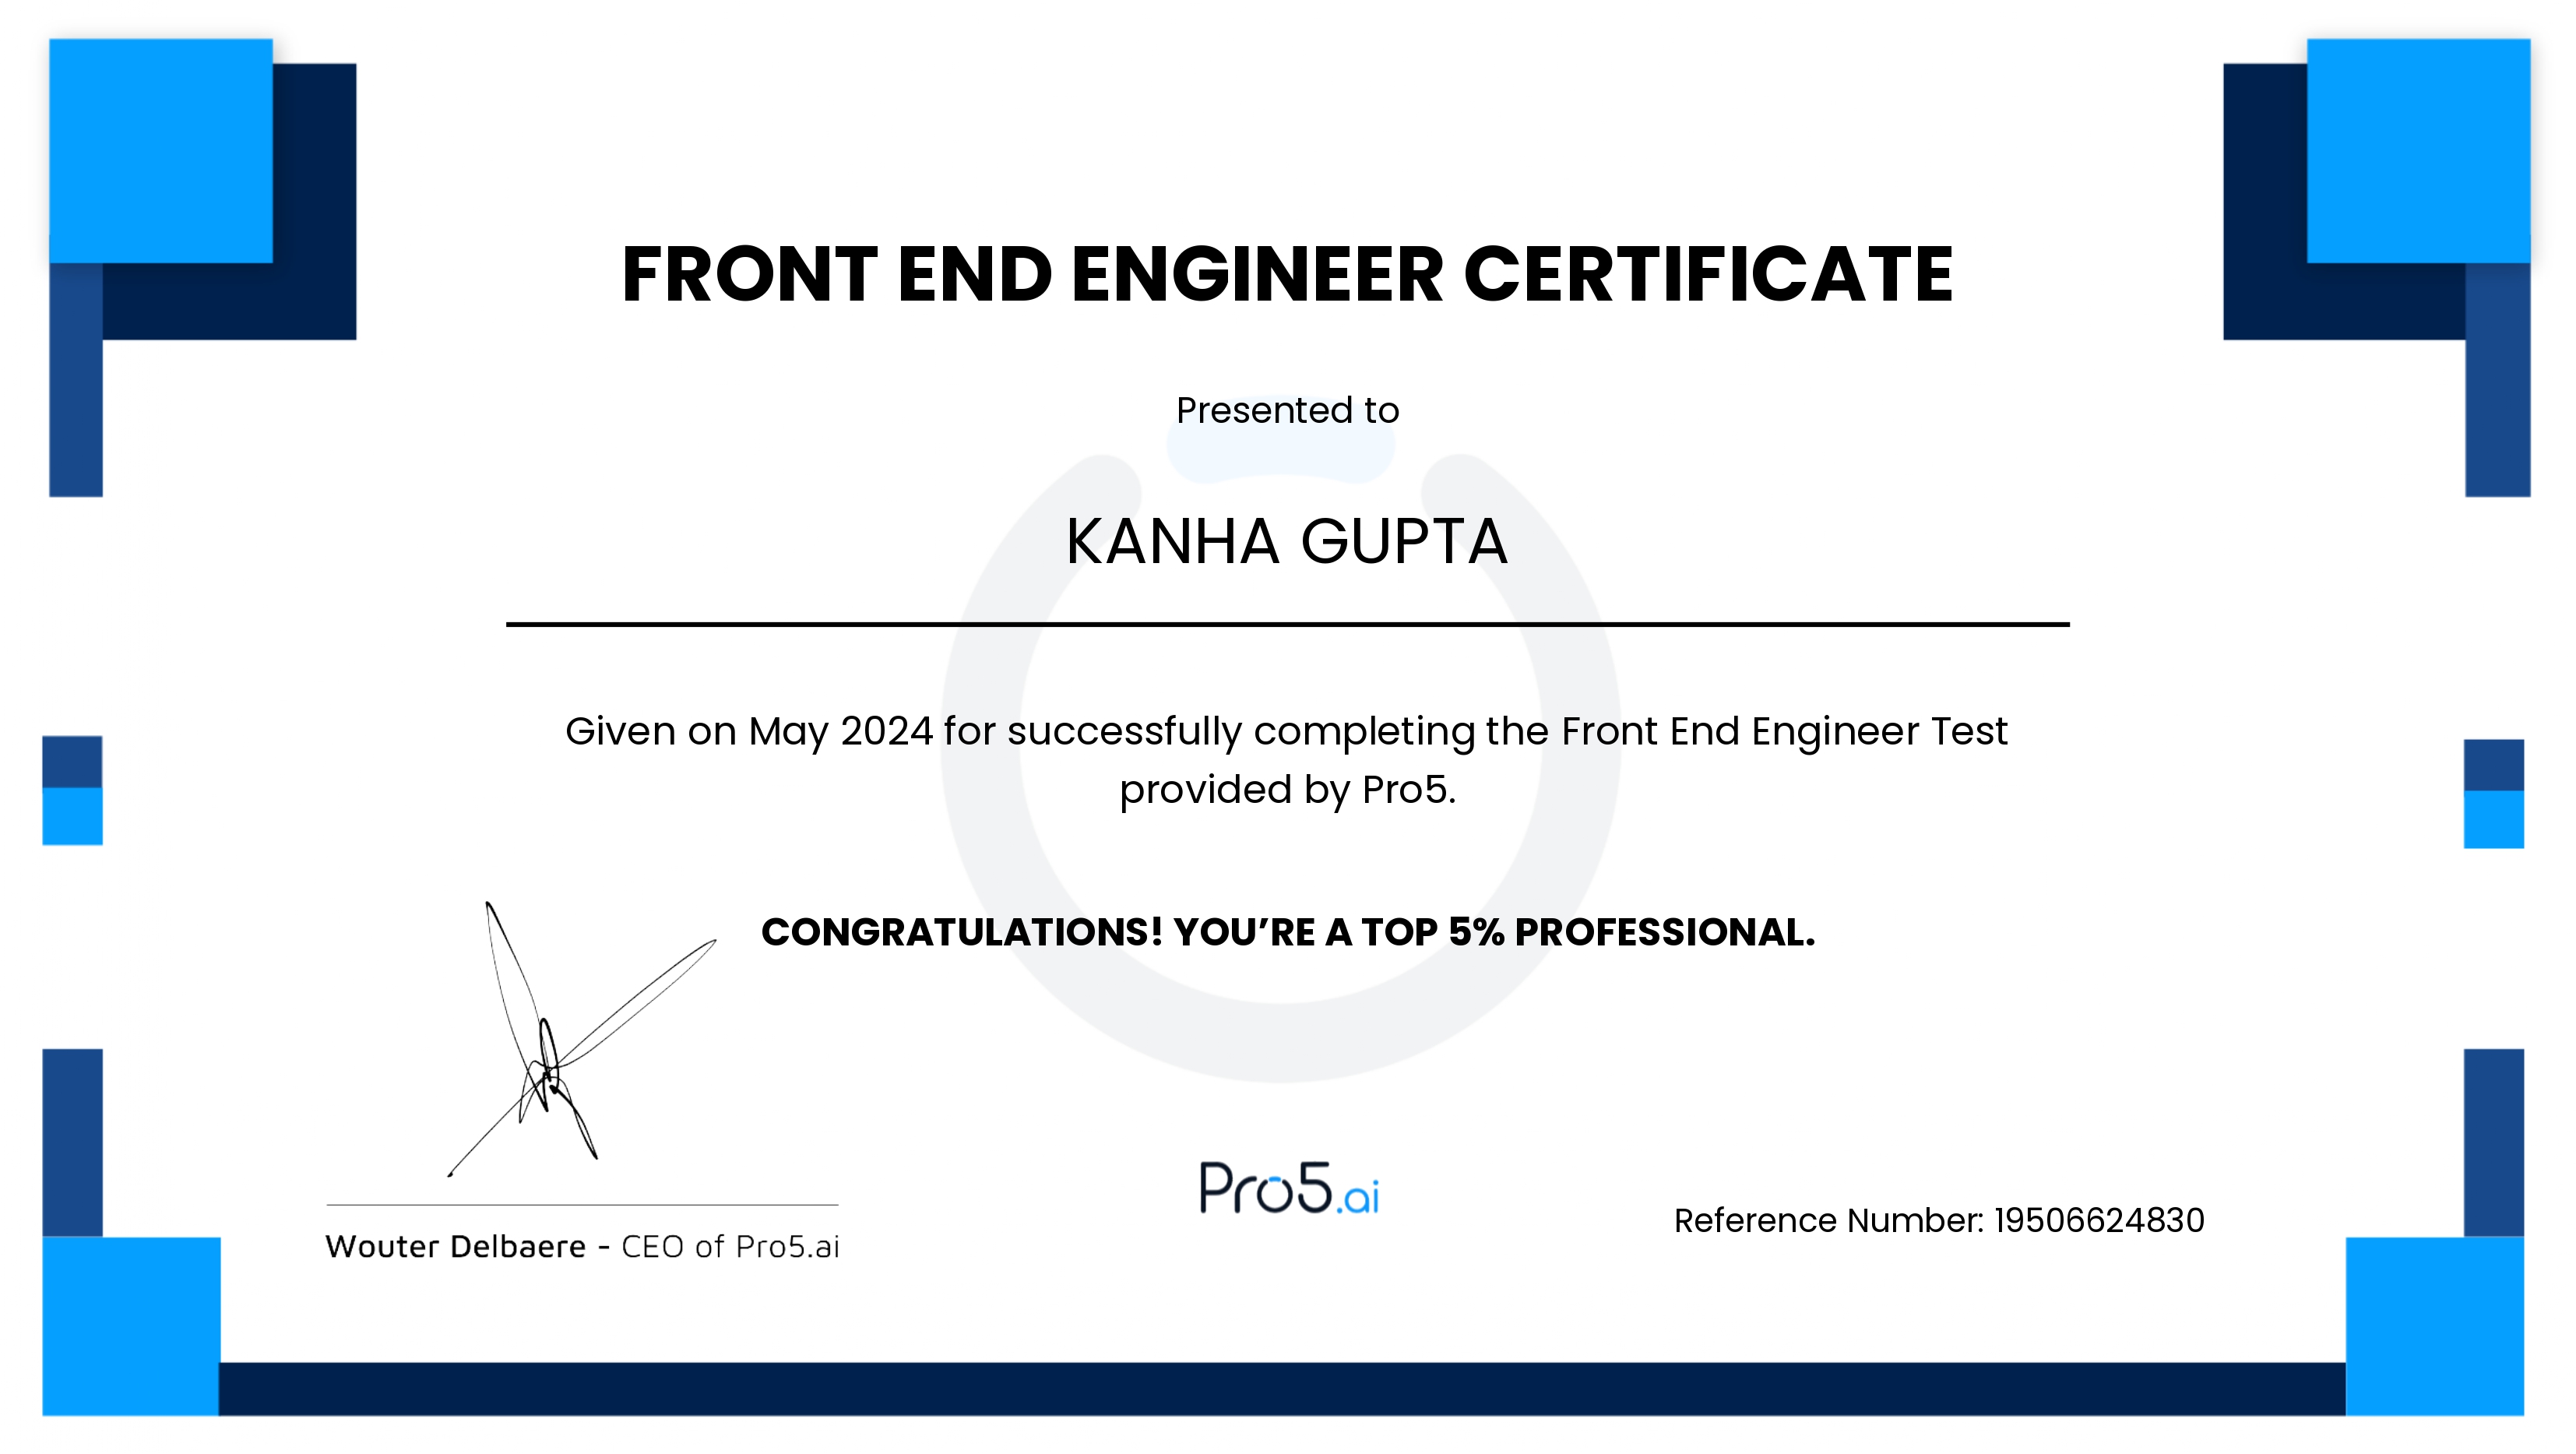 Front-End Engineer Certificate - Pro5.ai